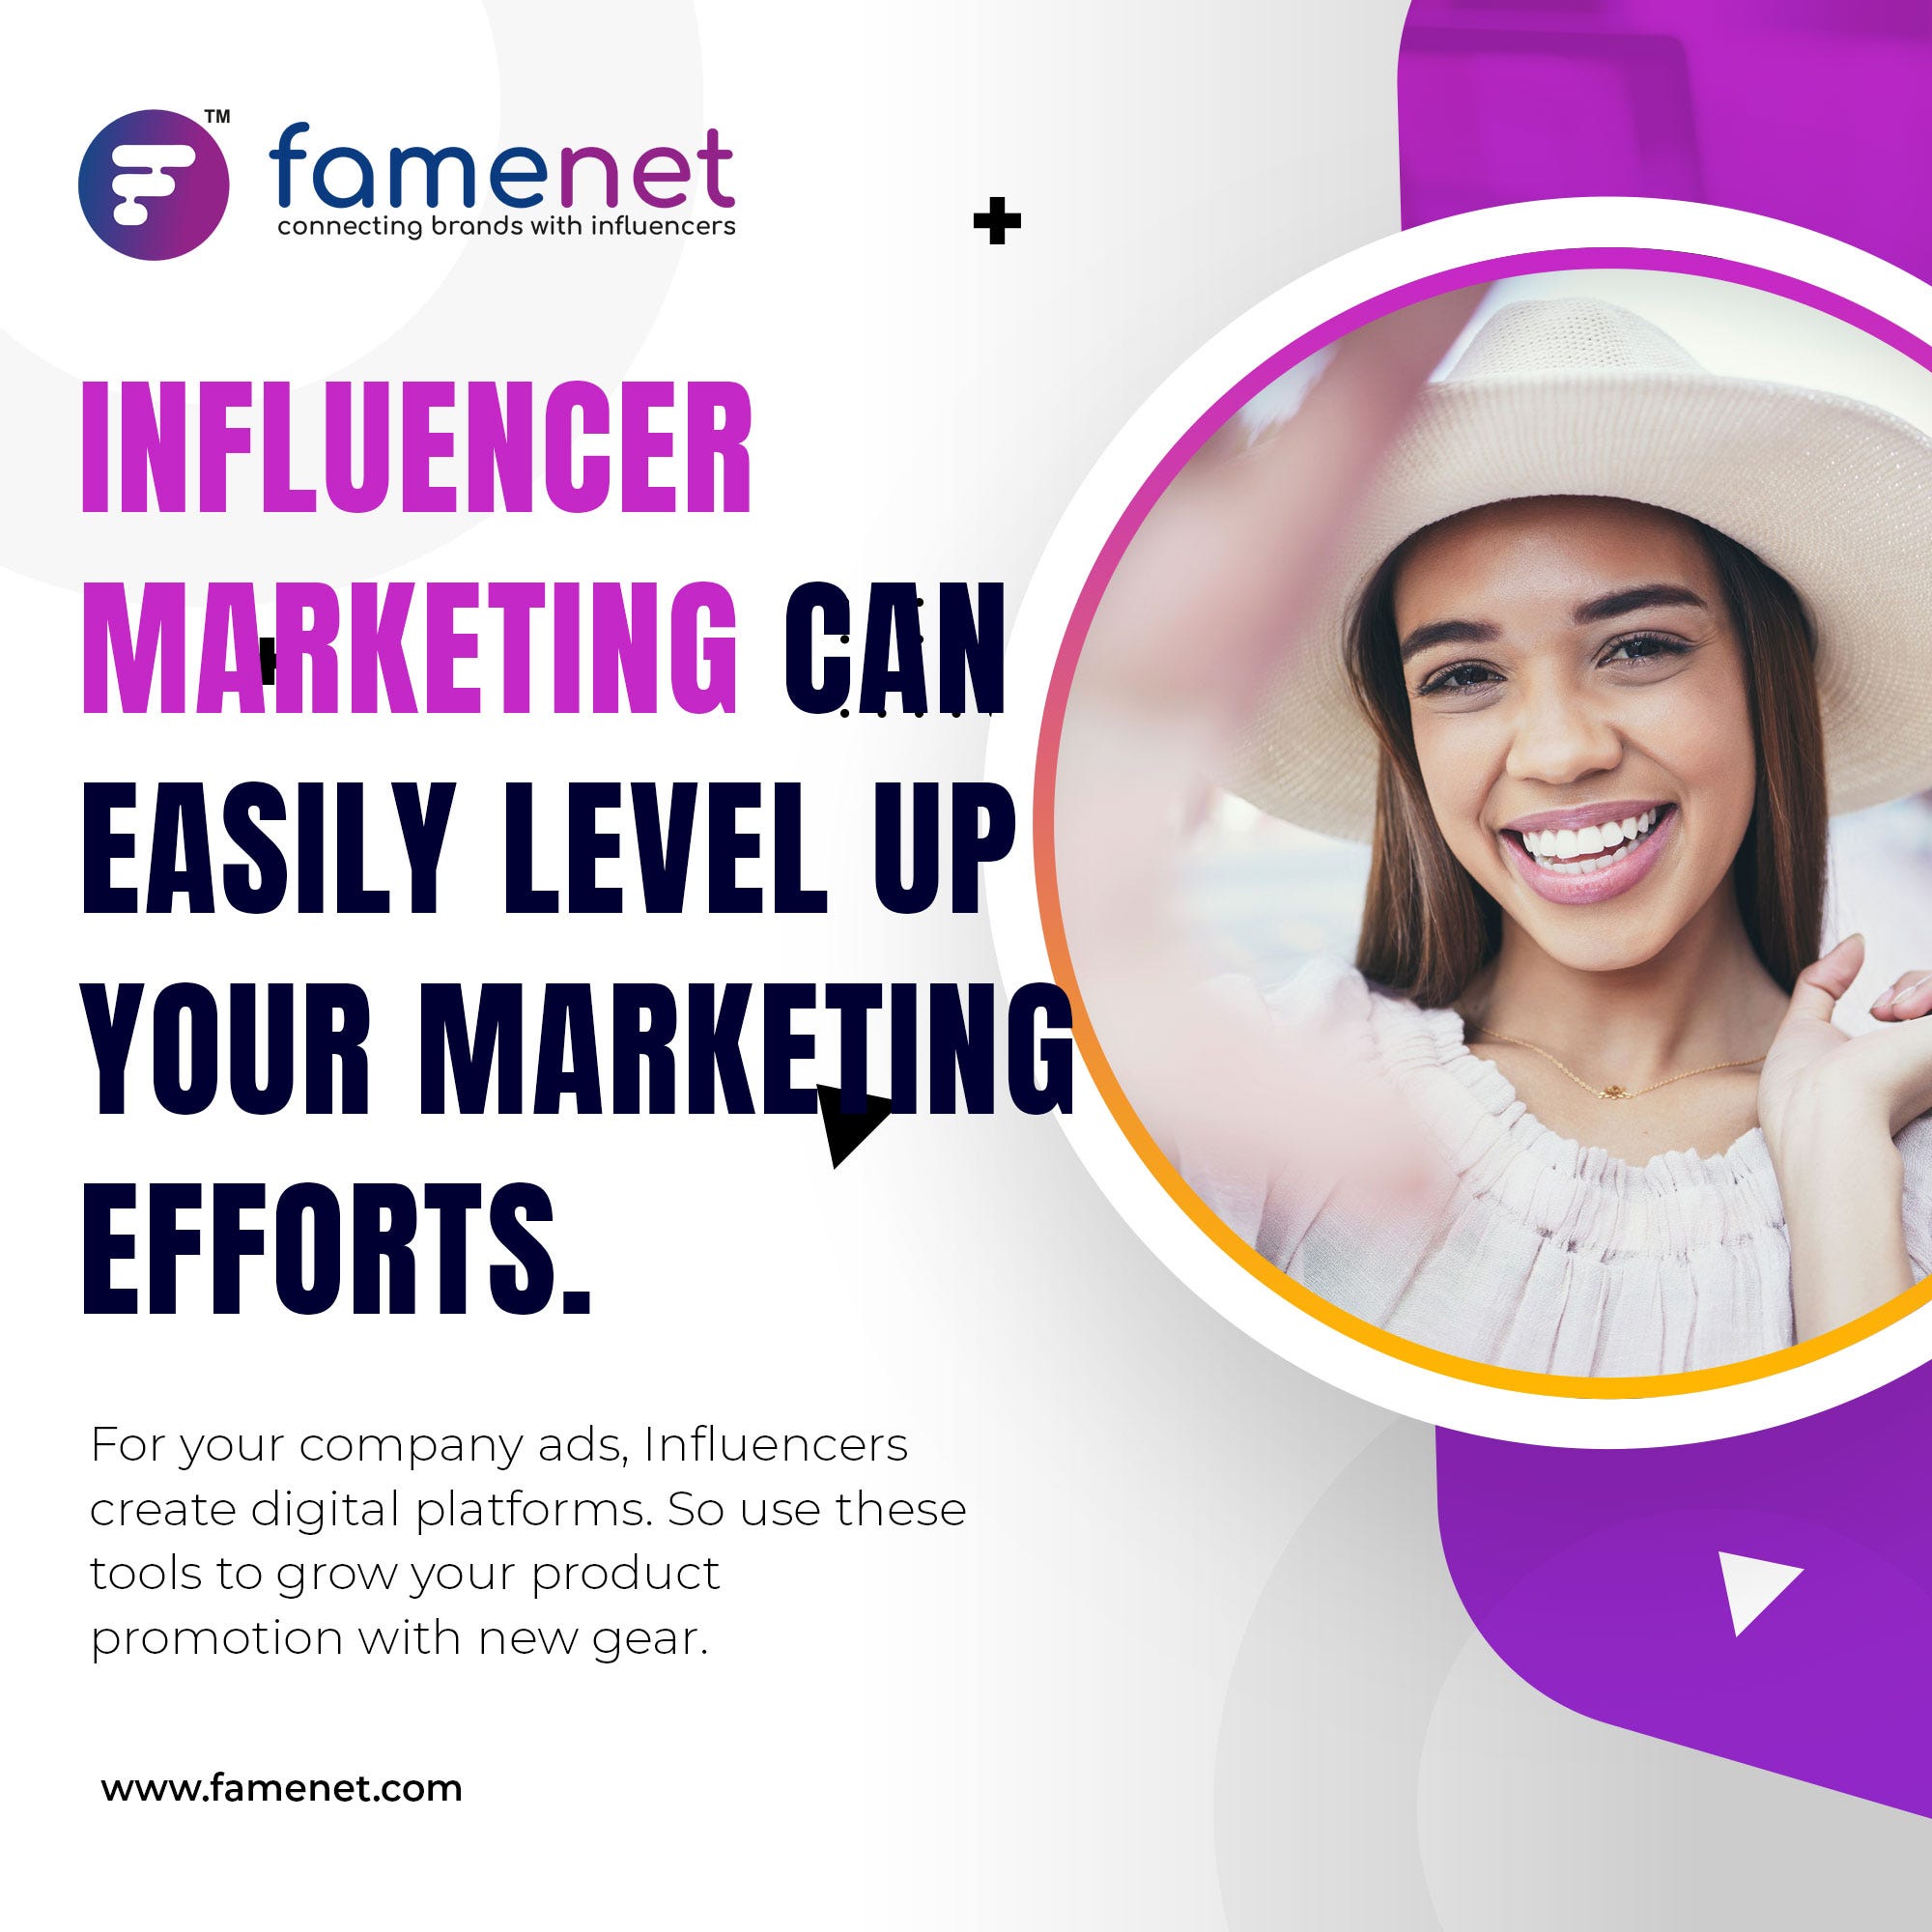 Influencer marketing can easily level up your marketing efforts.